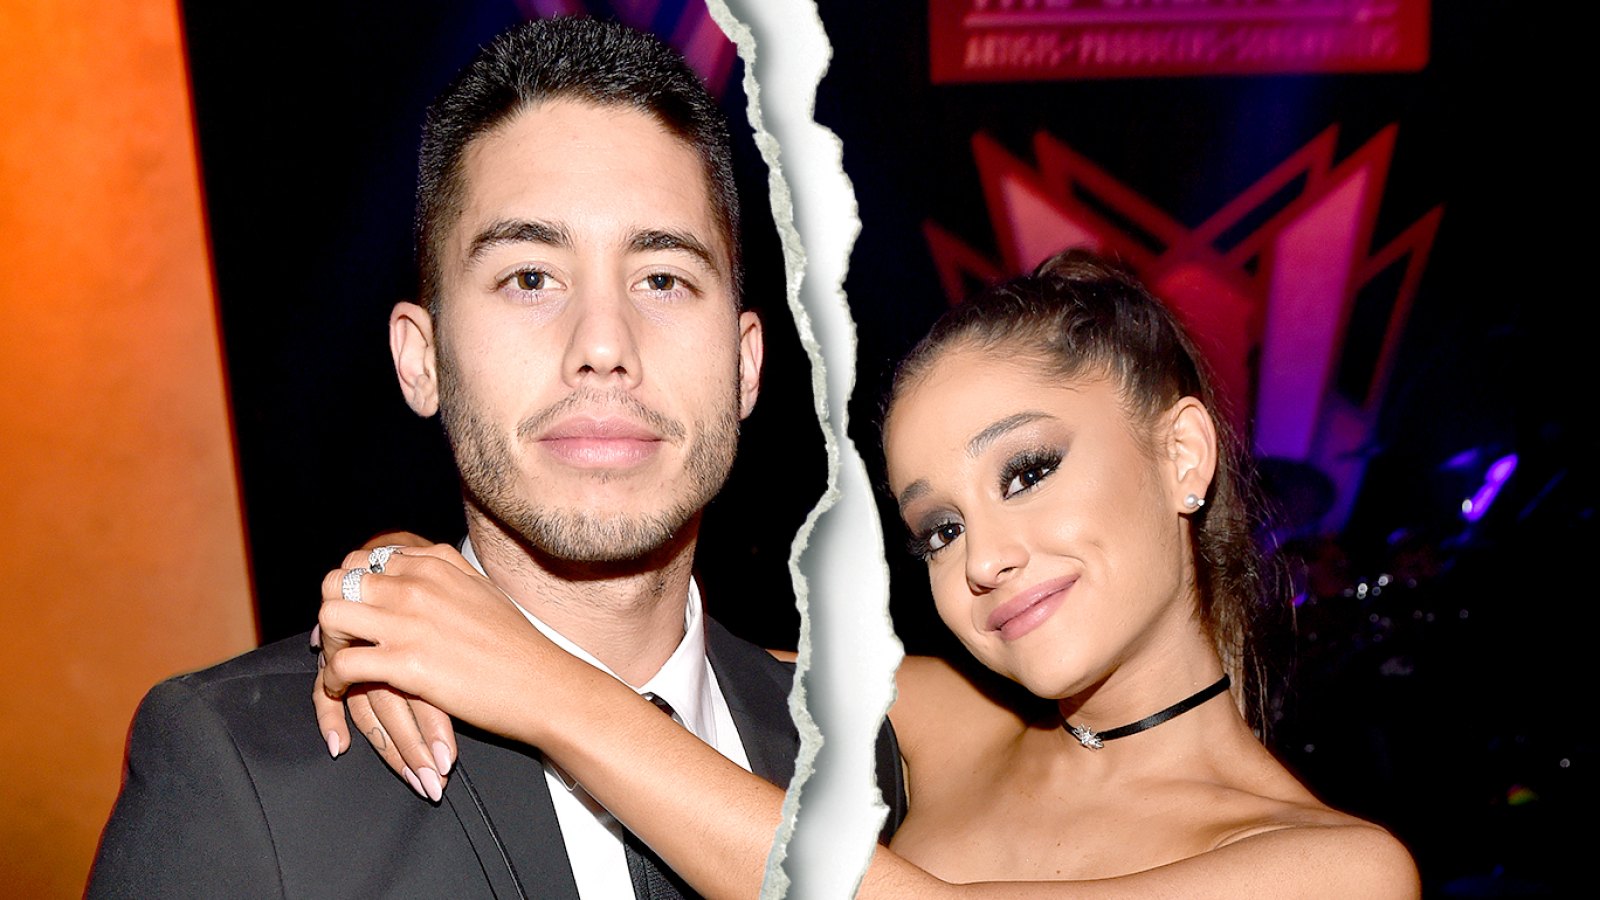 Ricky Alvarez and Ariana Grande attend The Creators Party, Presented by Spotify, Cicada, Los Angeles at Cicada on February 13, 2016 in Los Angeles, California.